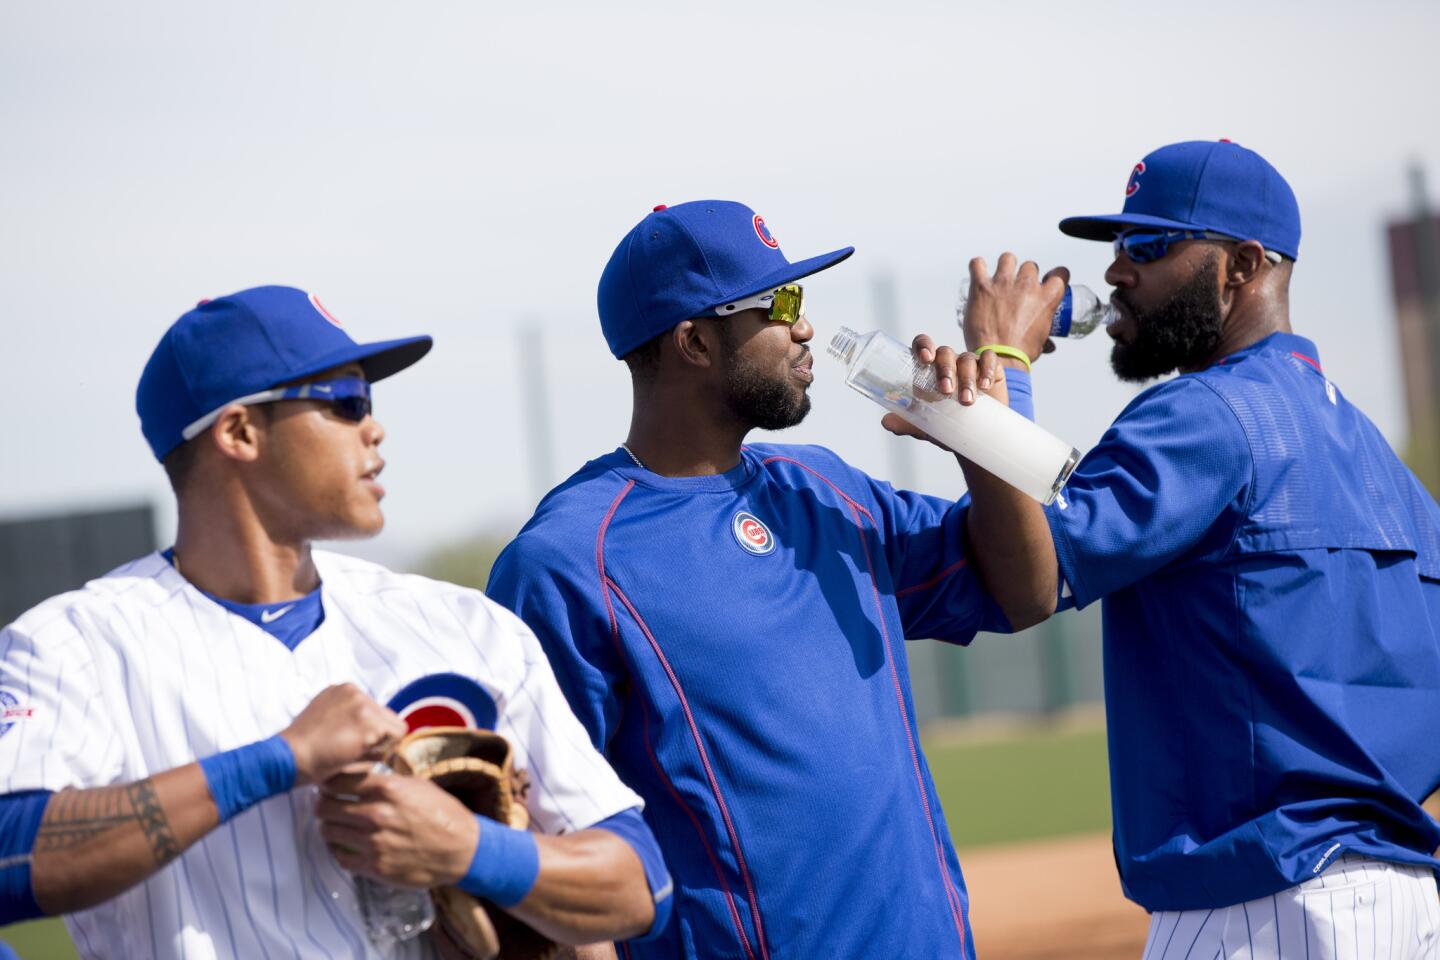 From left, Addison Russell, Dexter Fowler, and Jason Heyward take a drink while attending practice during spring training at Sloan Park on Monday, Feb. 29, 2016, in Mesa, Ariz.